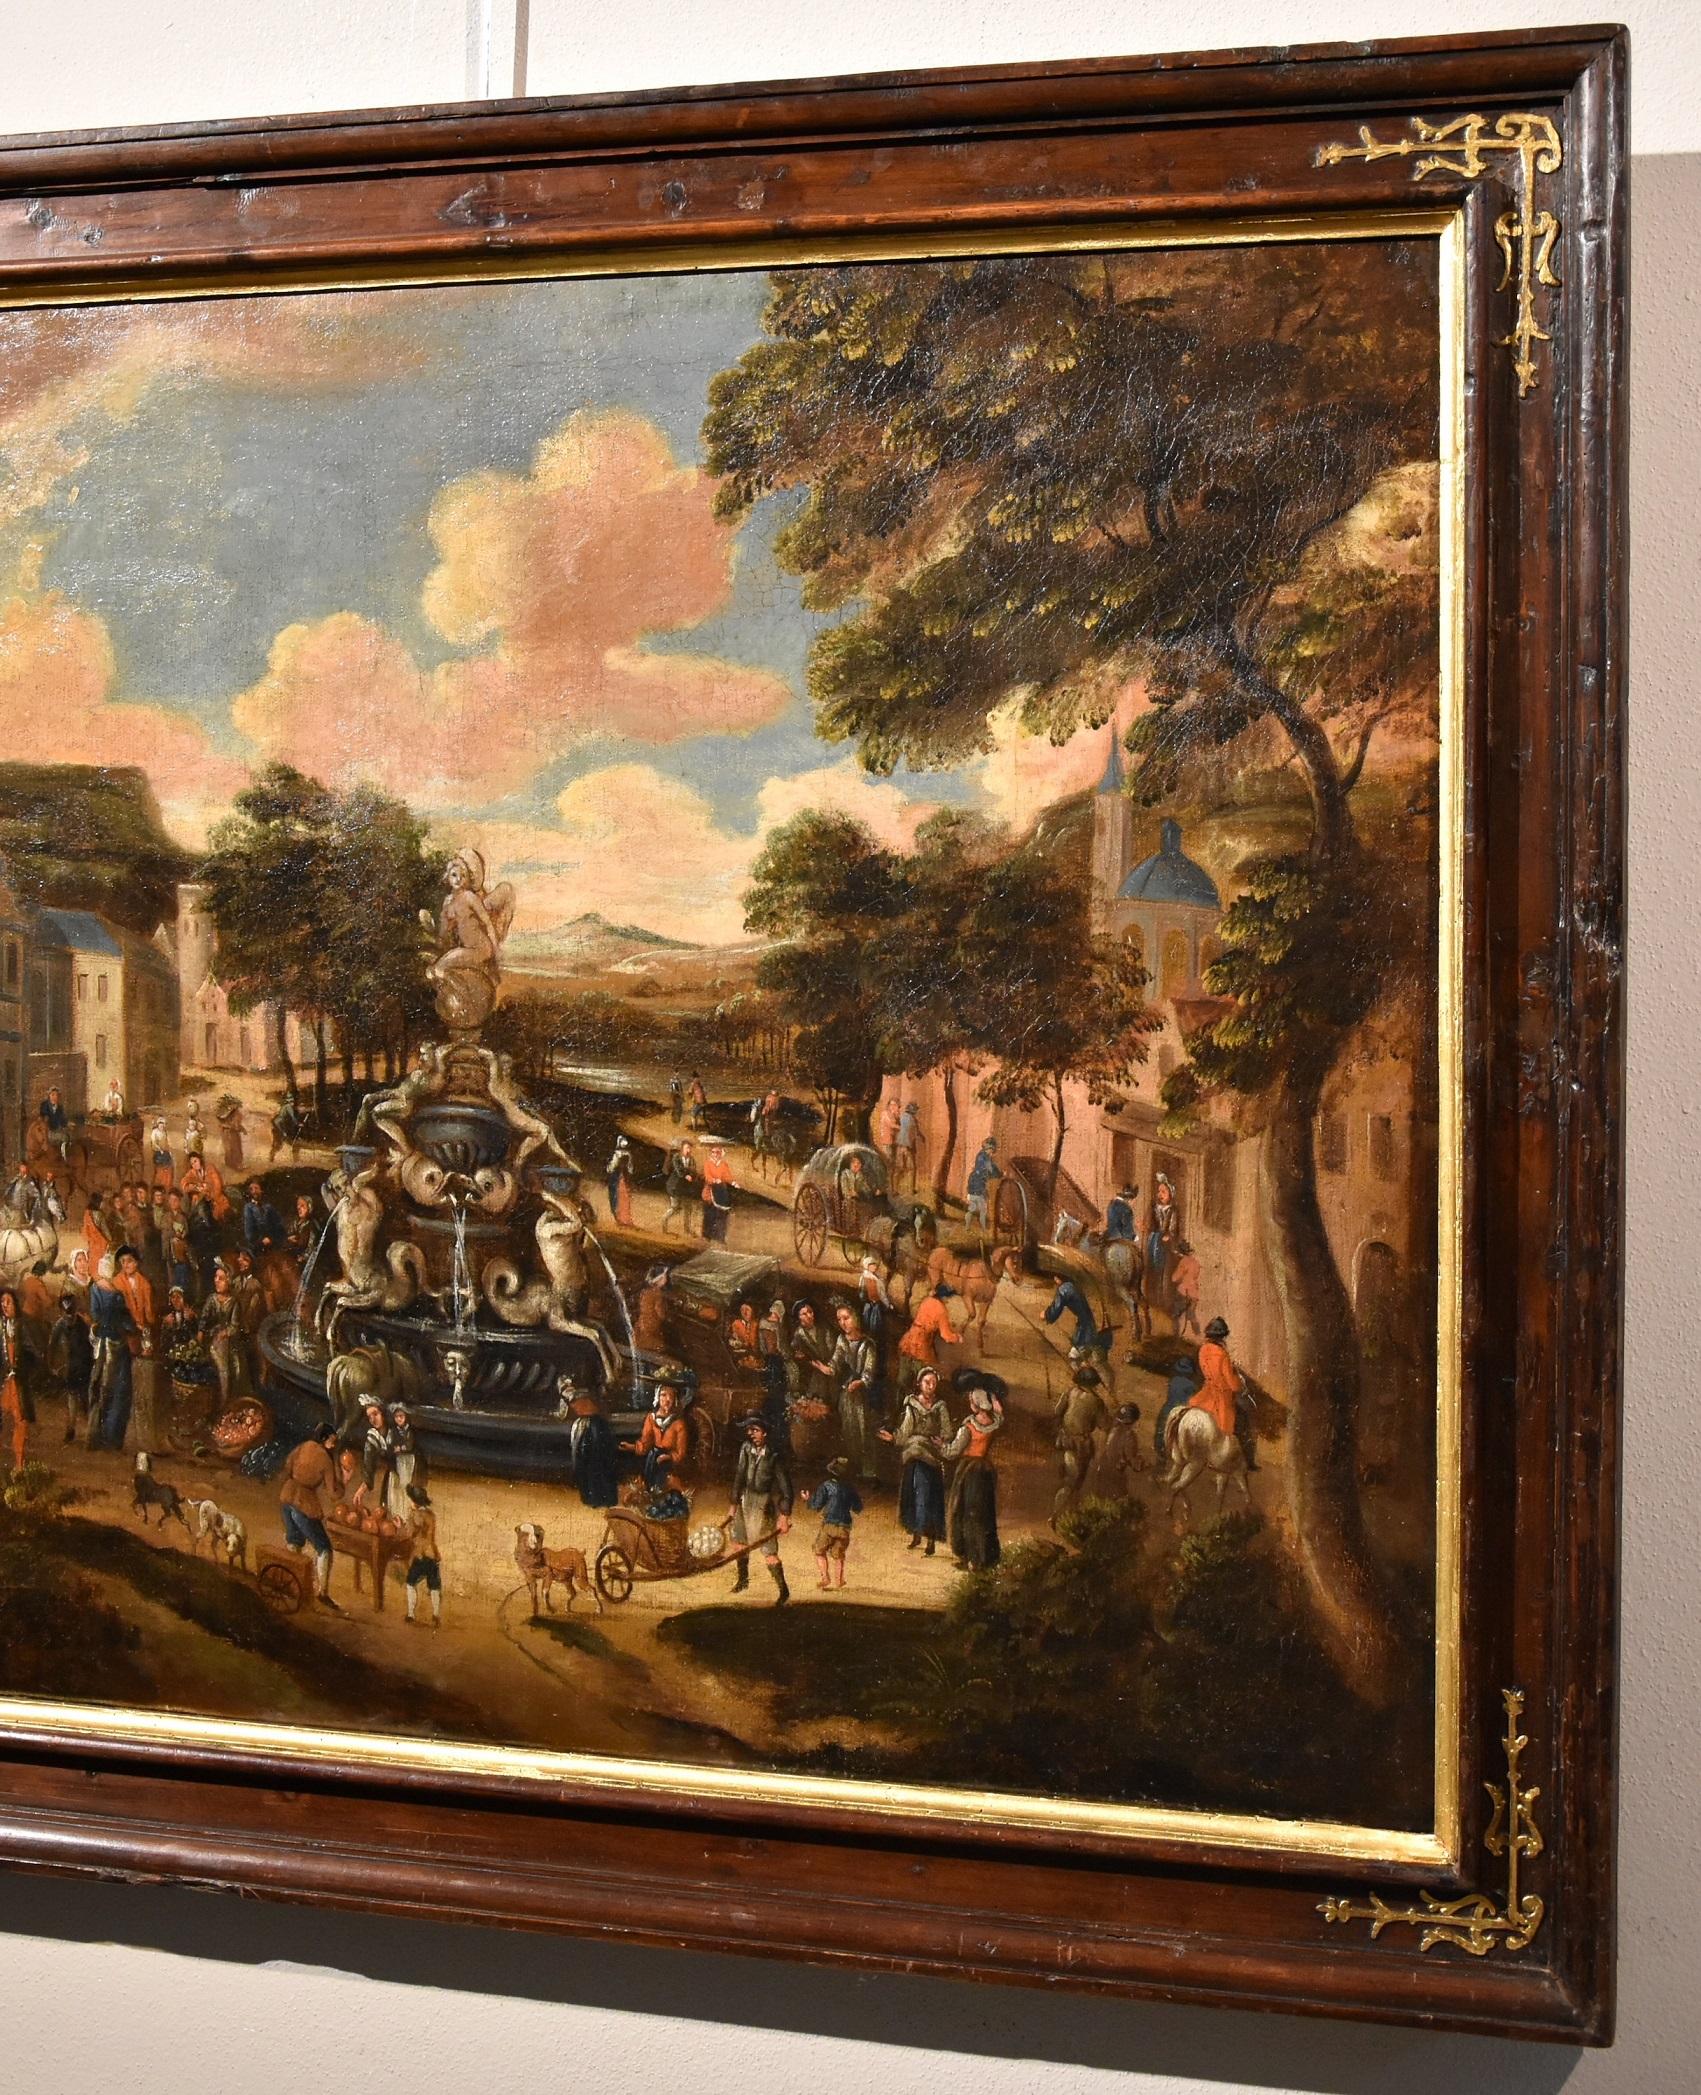 Landscape Village Market Paint Oil on canvas Old master 18th Century Flemish Art - Old Masters Painting by Circle of Pieter van Bredael (Antwerp 1629 - 1719)